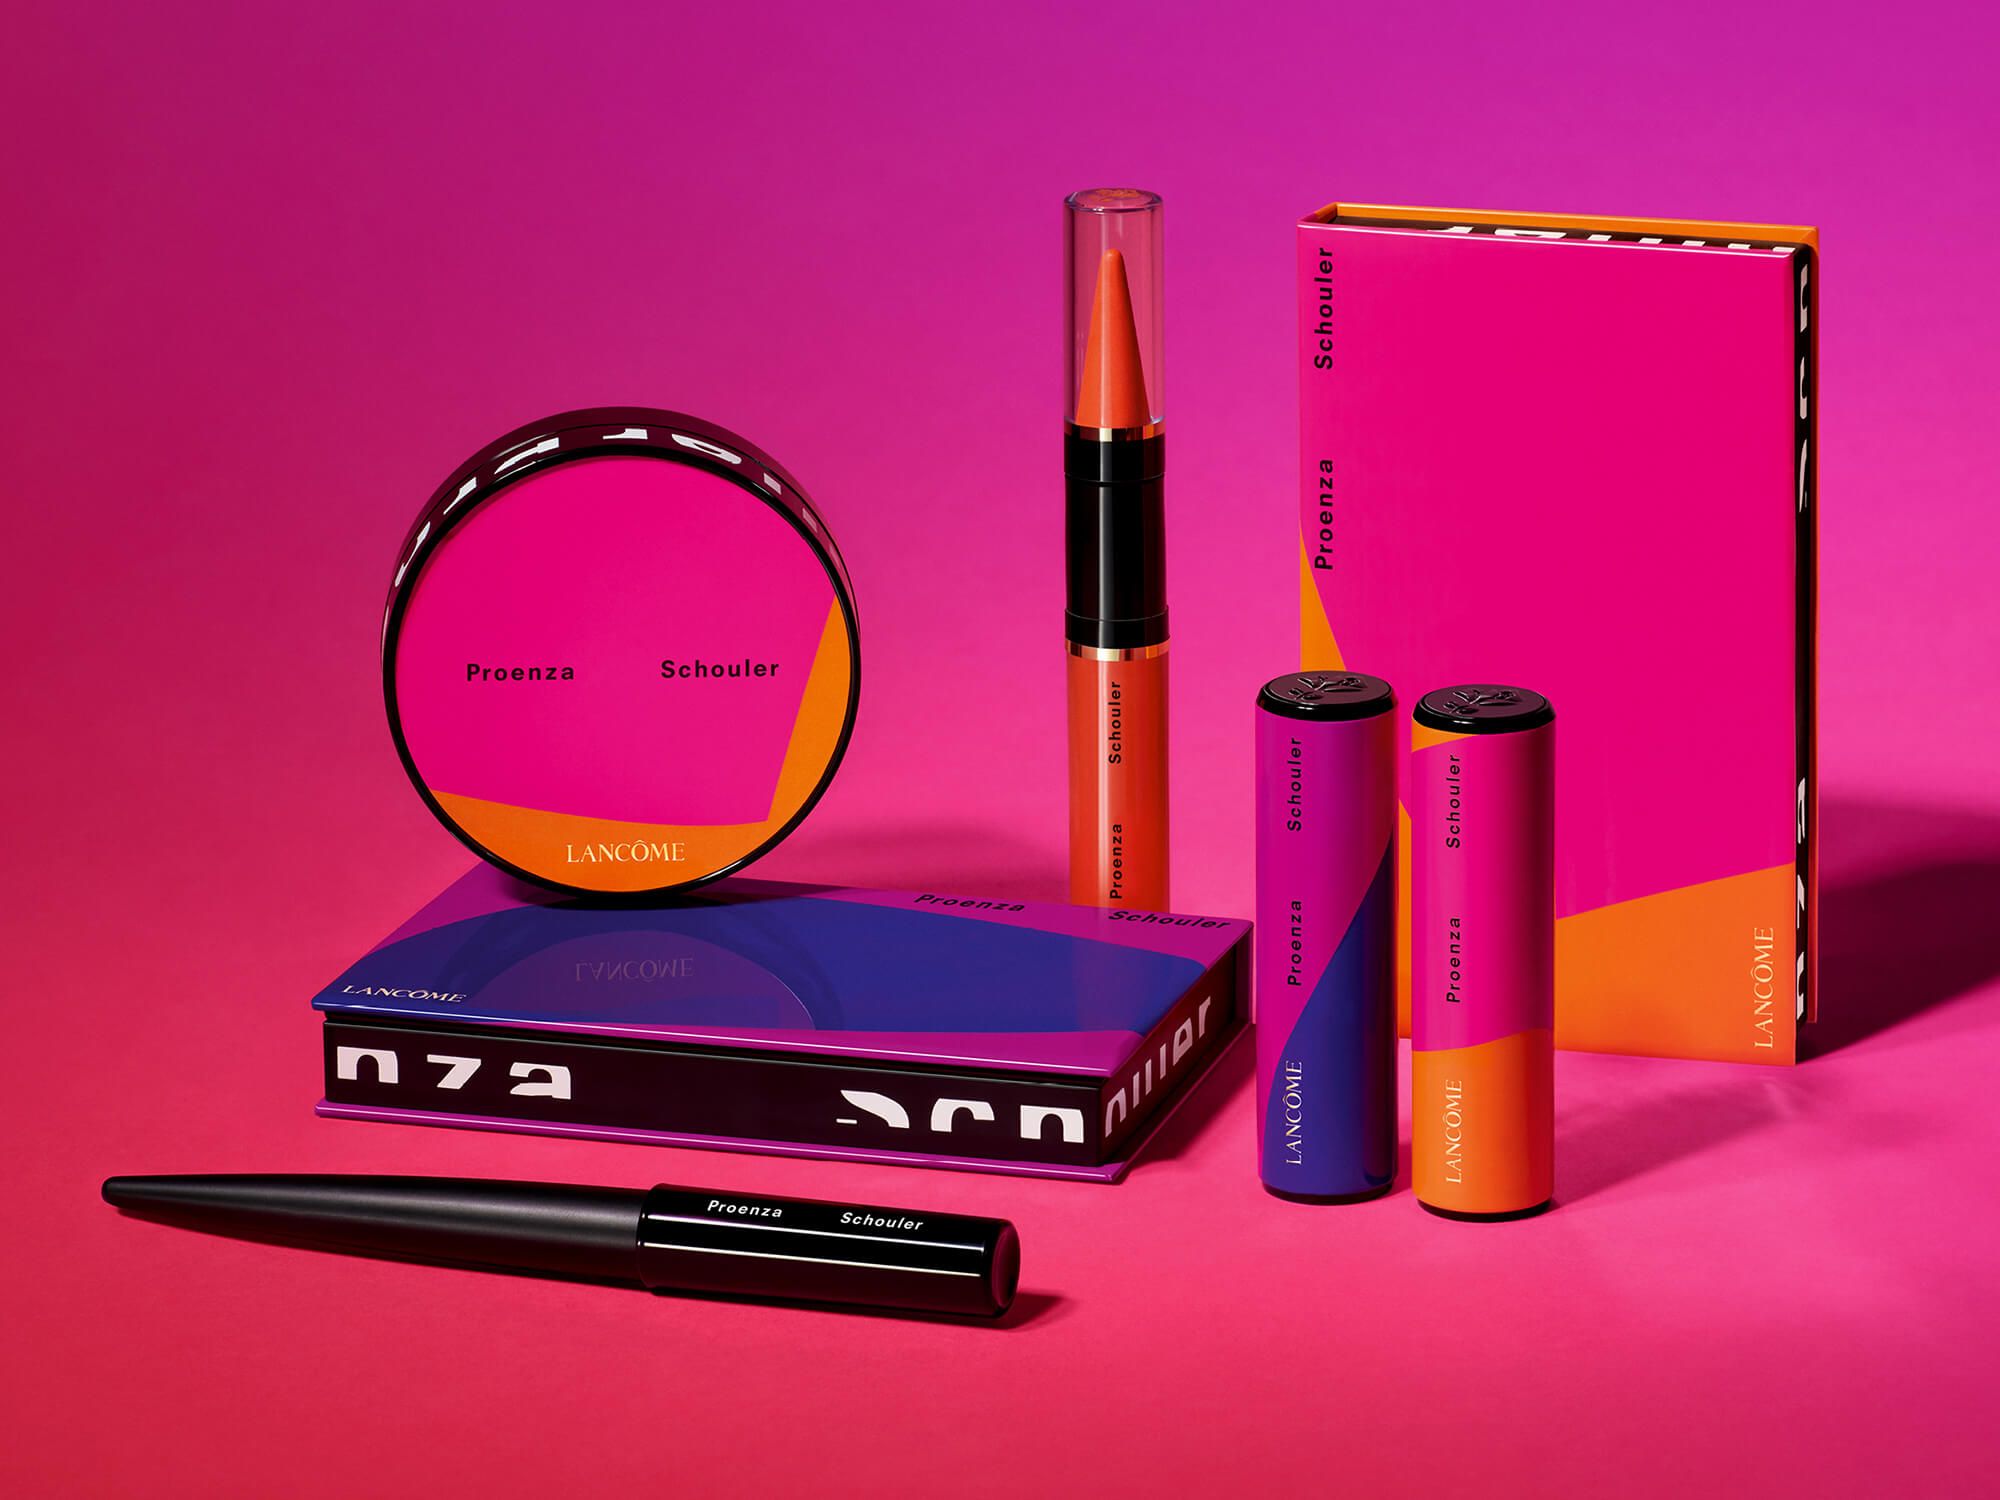 Proenza Schouler for Lancome makeup collection